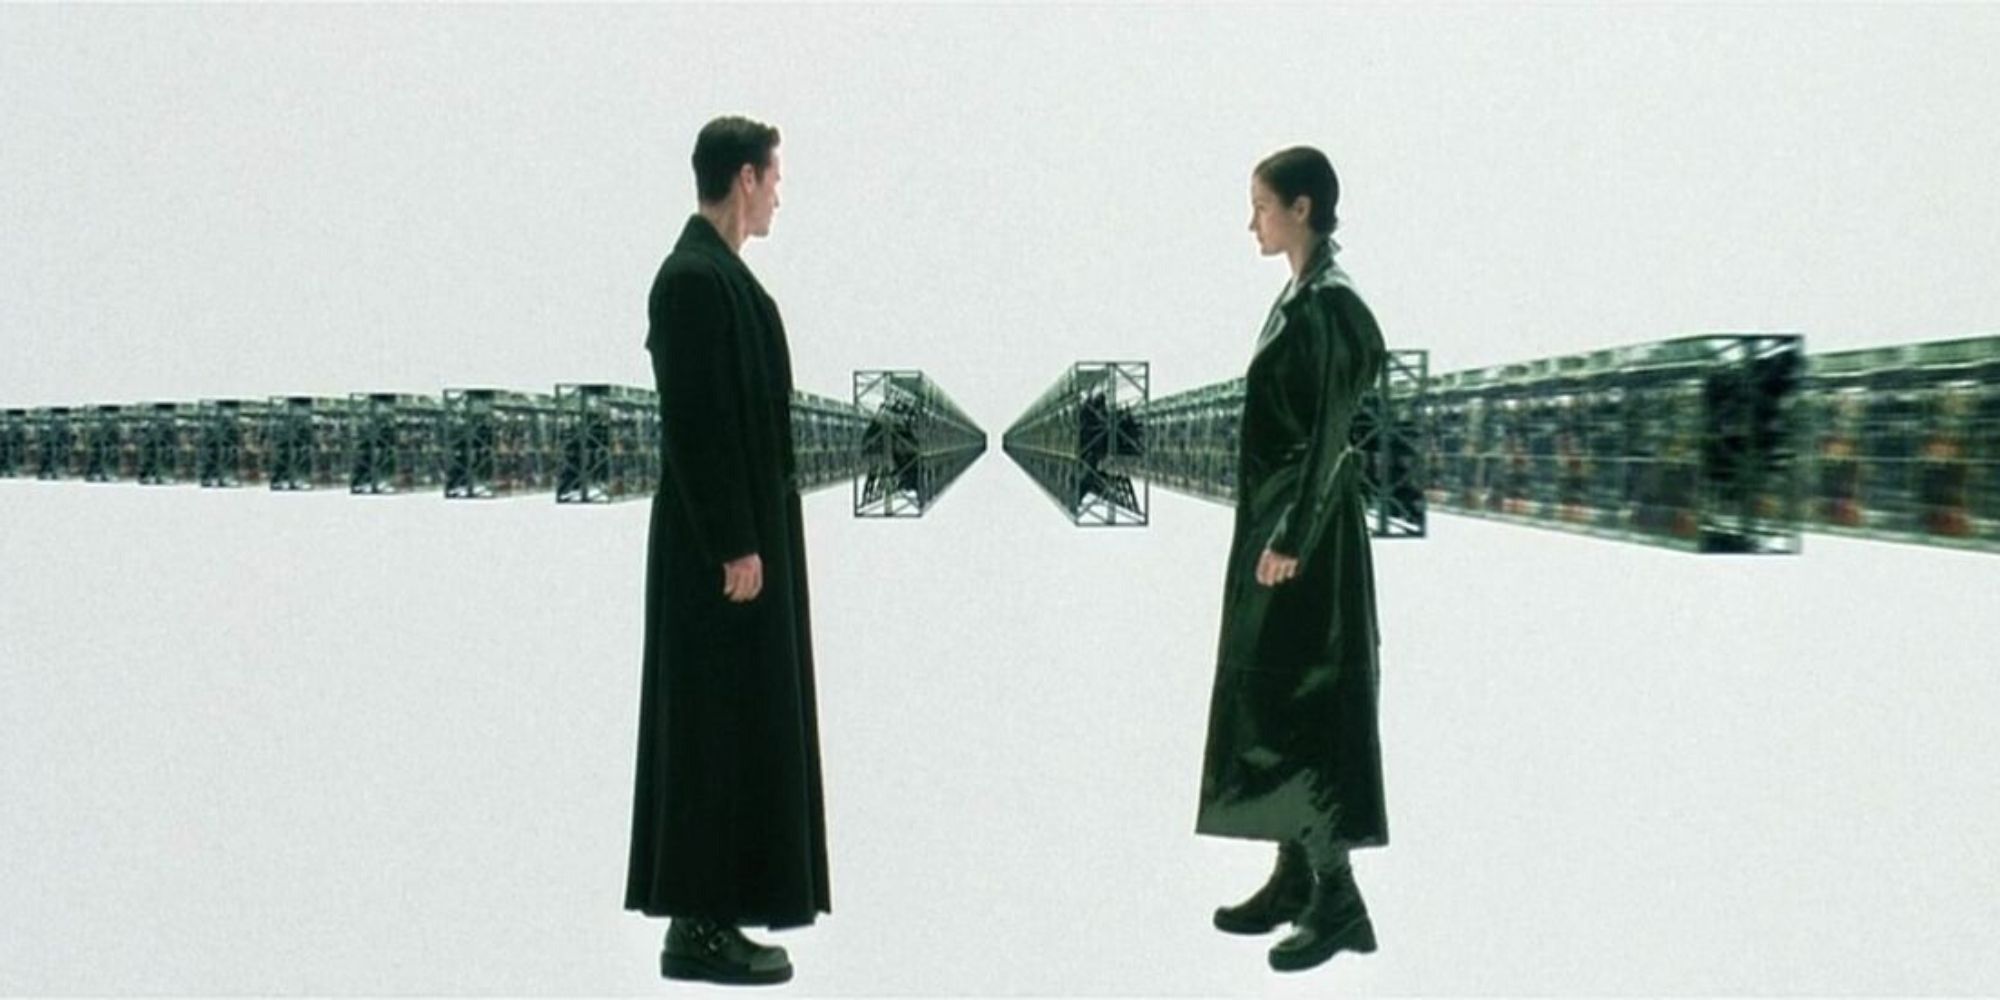 Neo and Trinity in the armory room in The Matrix